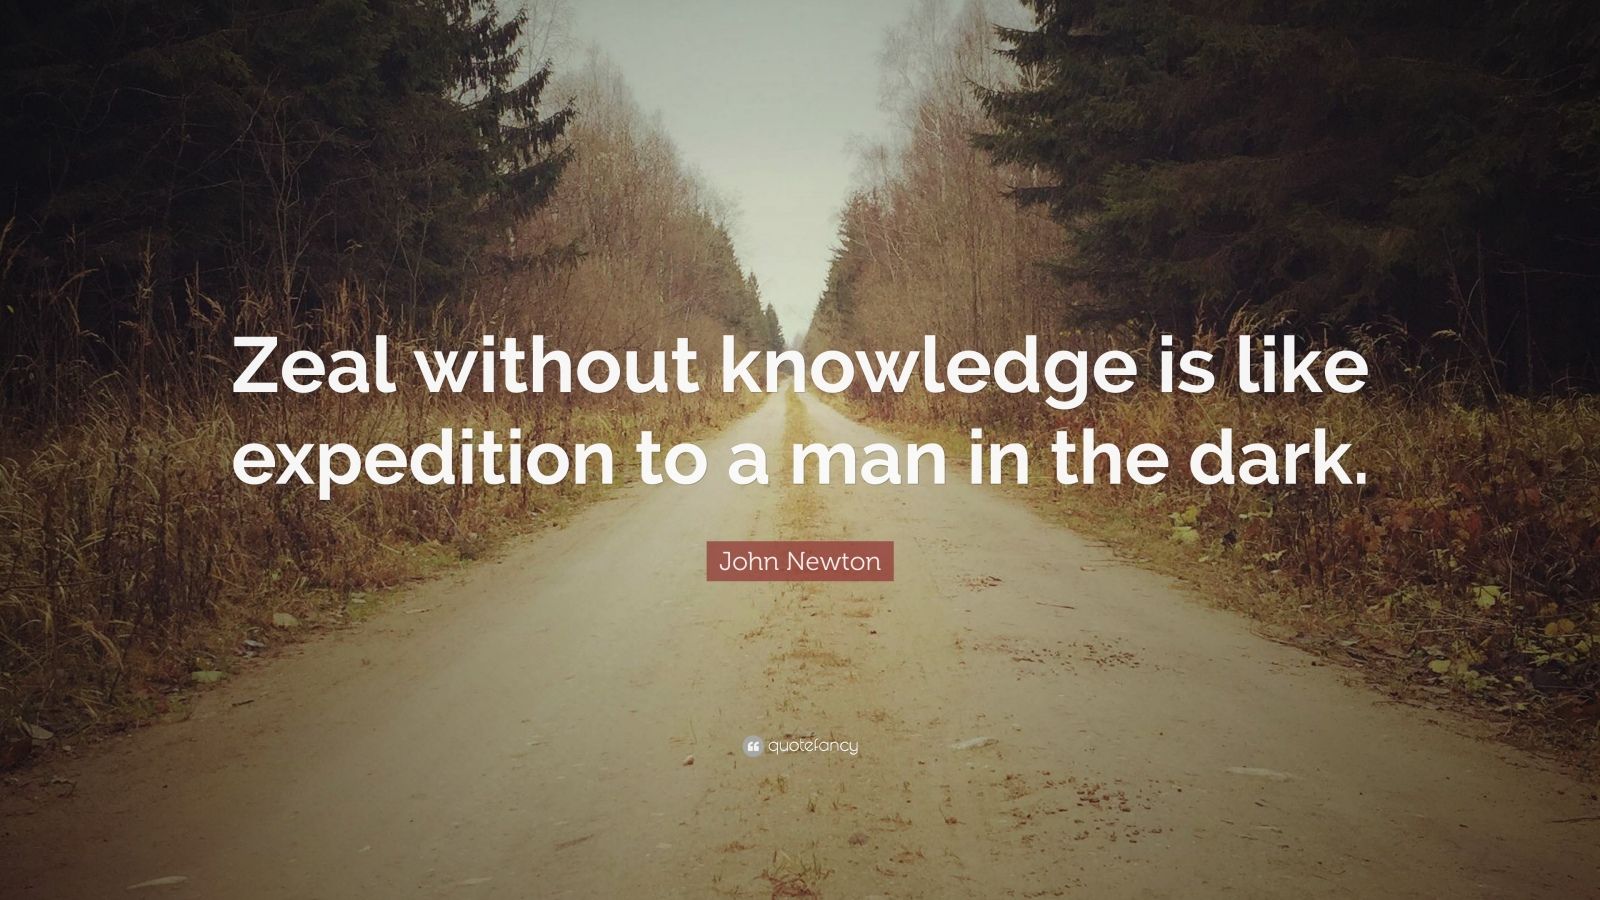 John Newton Quote: "Zeal without knowledge is like ...